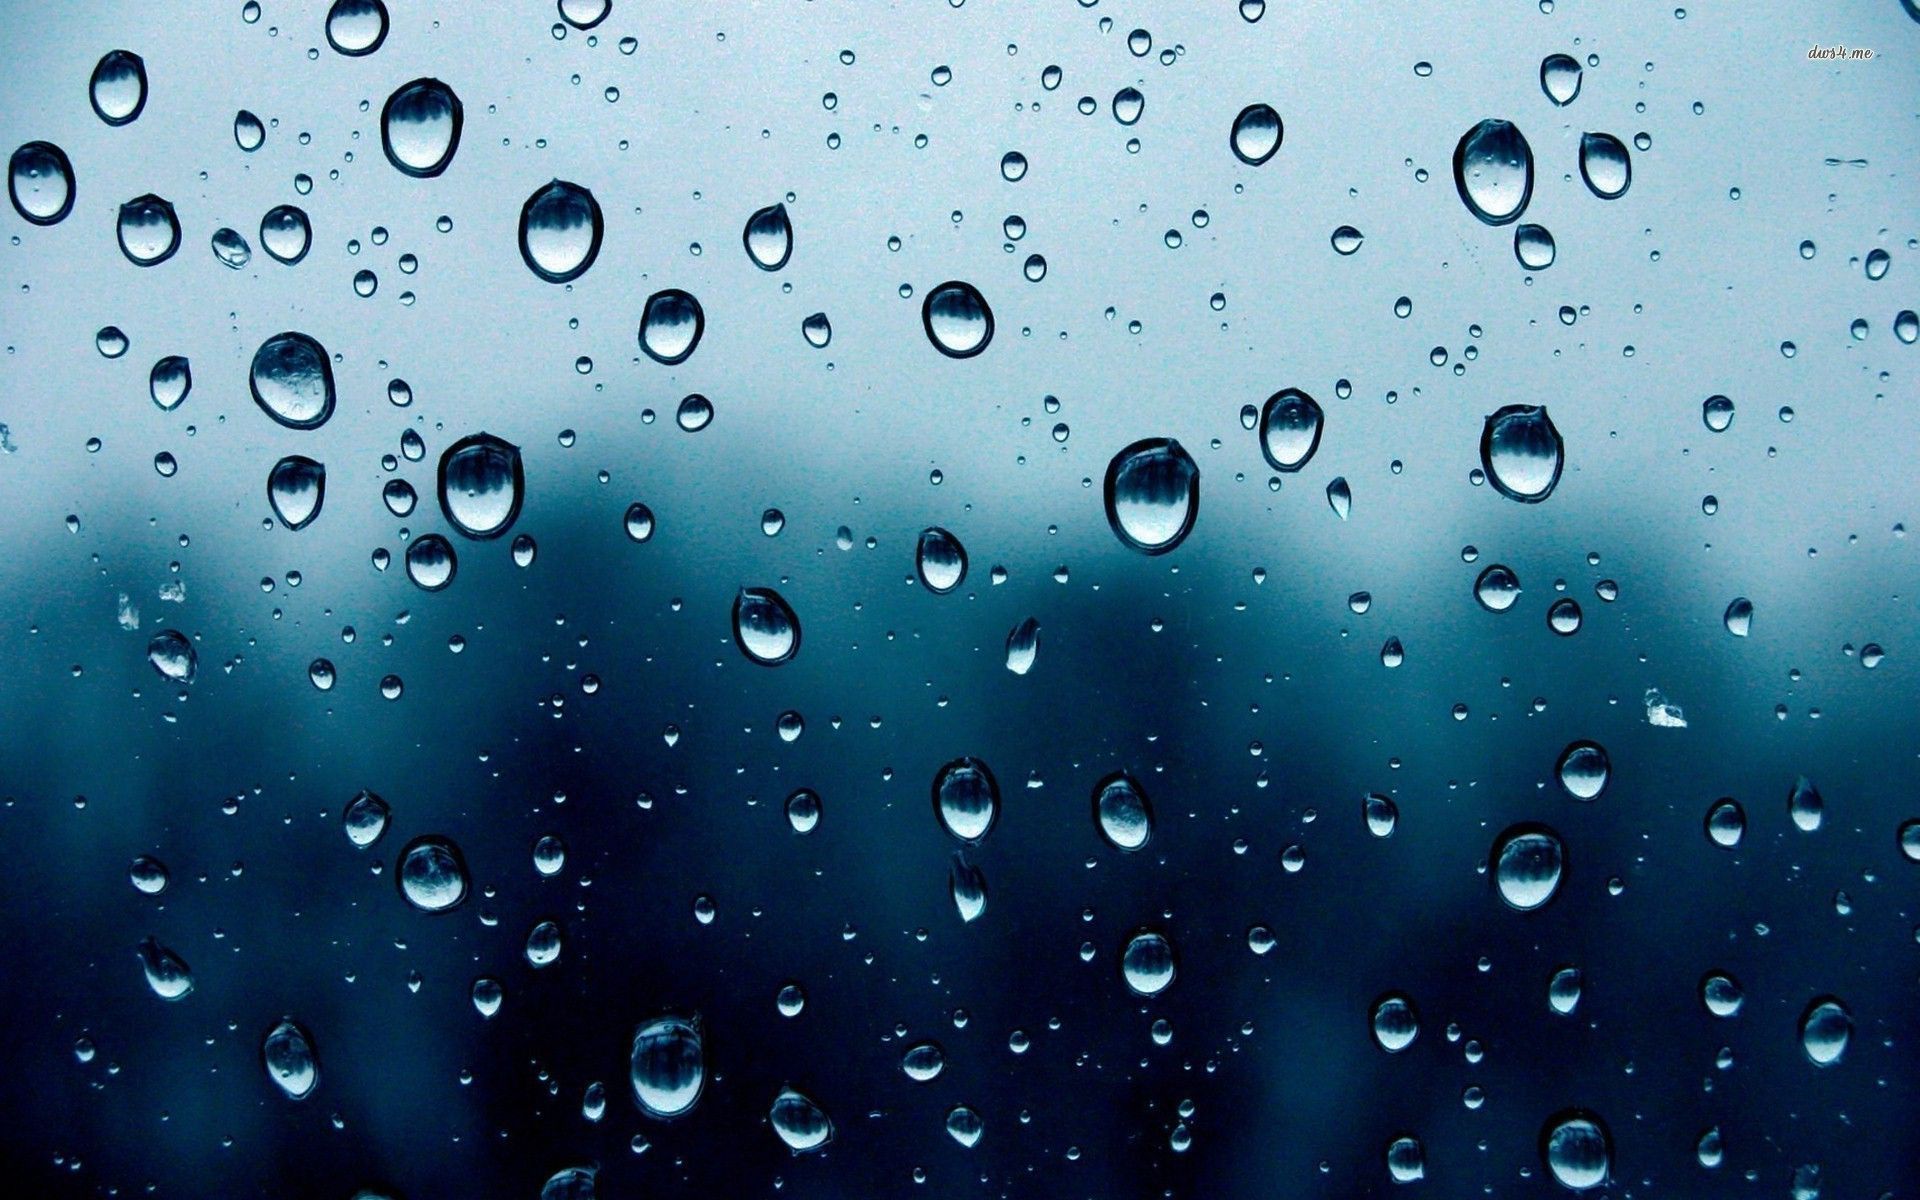 Raindrops Wallpapers   Top Free Raindrops Backgrounds